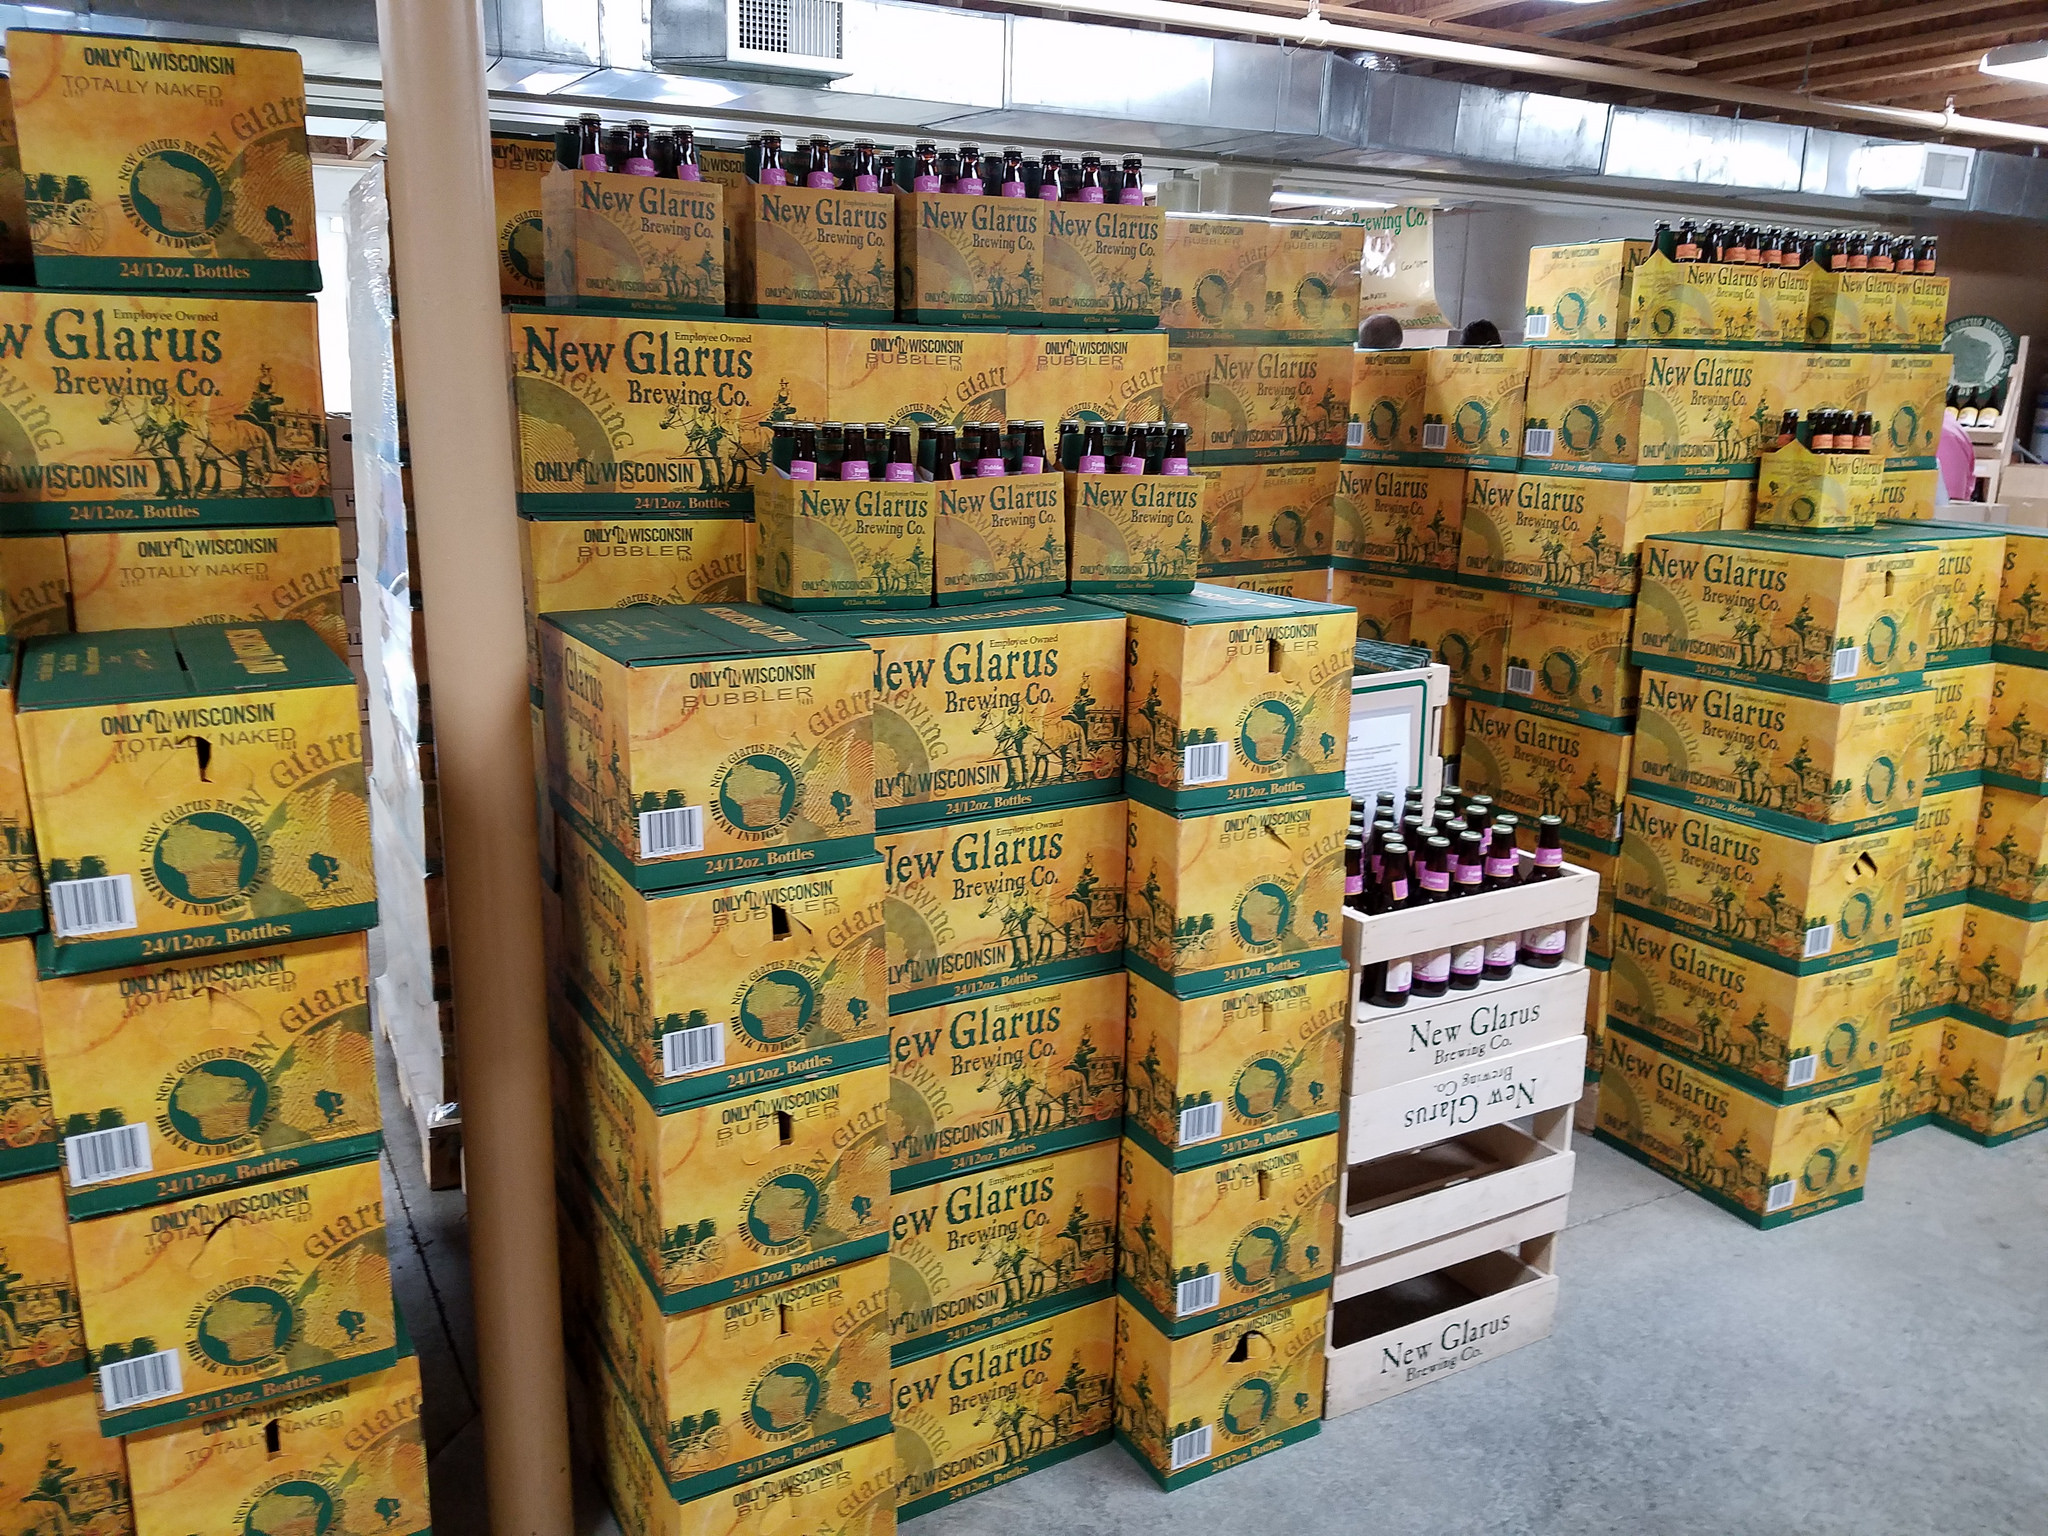 Stacks of New Glarus beer in a store